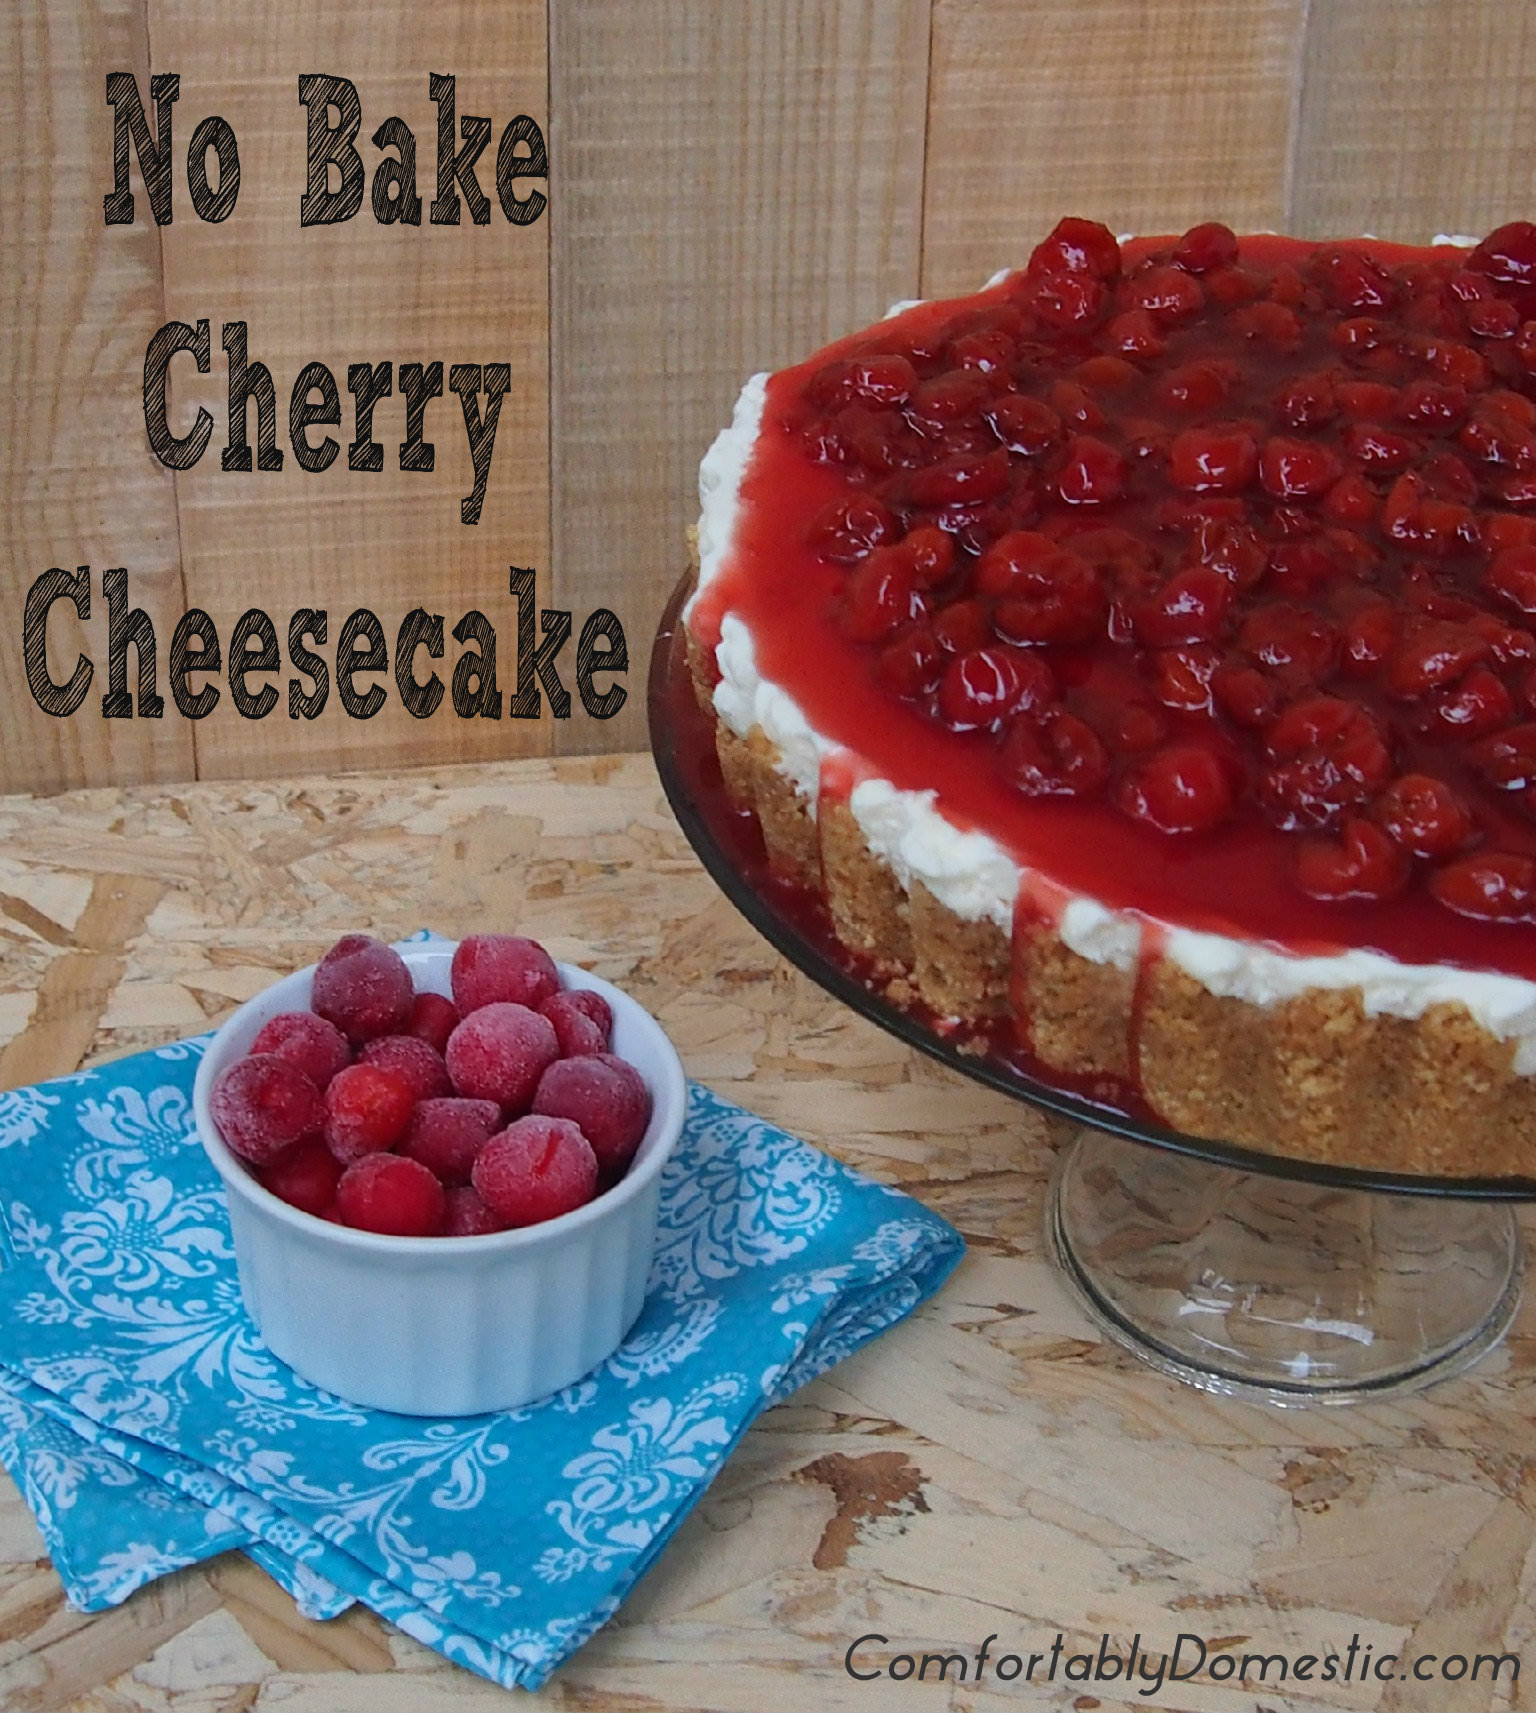 No Bake Cherry Cheesecake is a quick and easy dessert alternative to traditional cheesecake. Get all of the rich flavor, without all the work! || ComfortablyDomestic.com